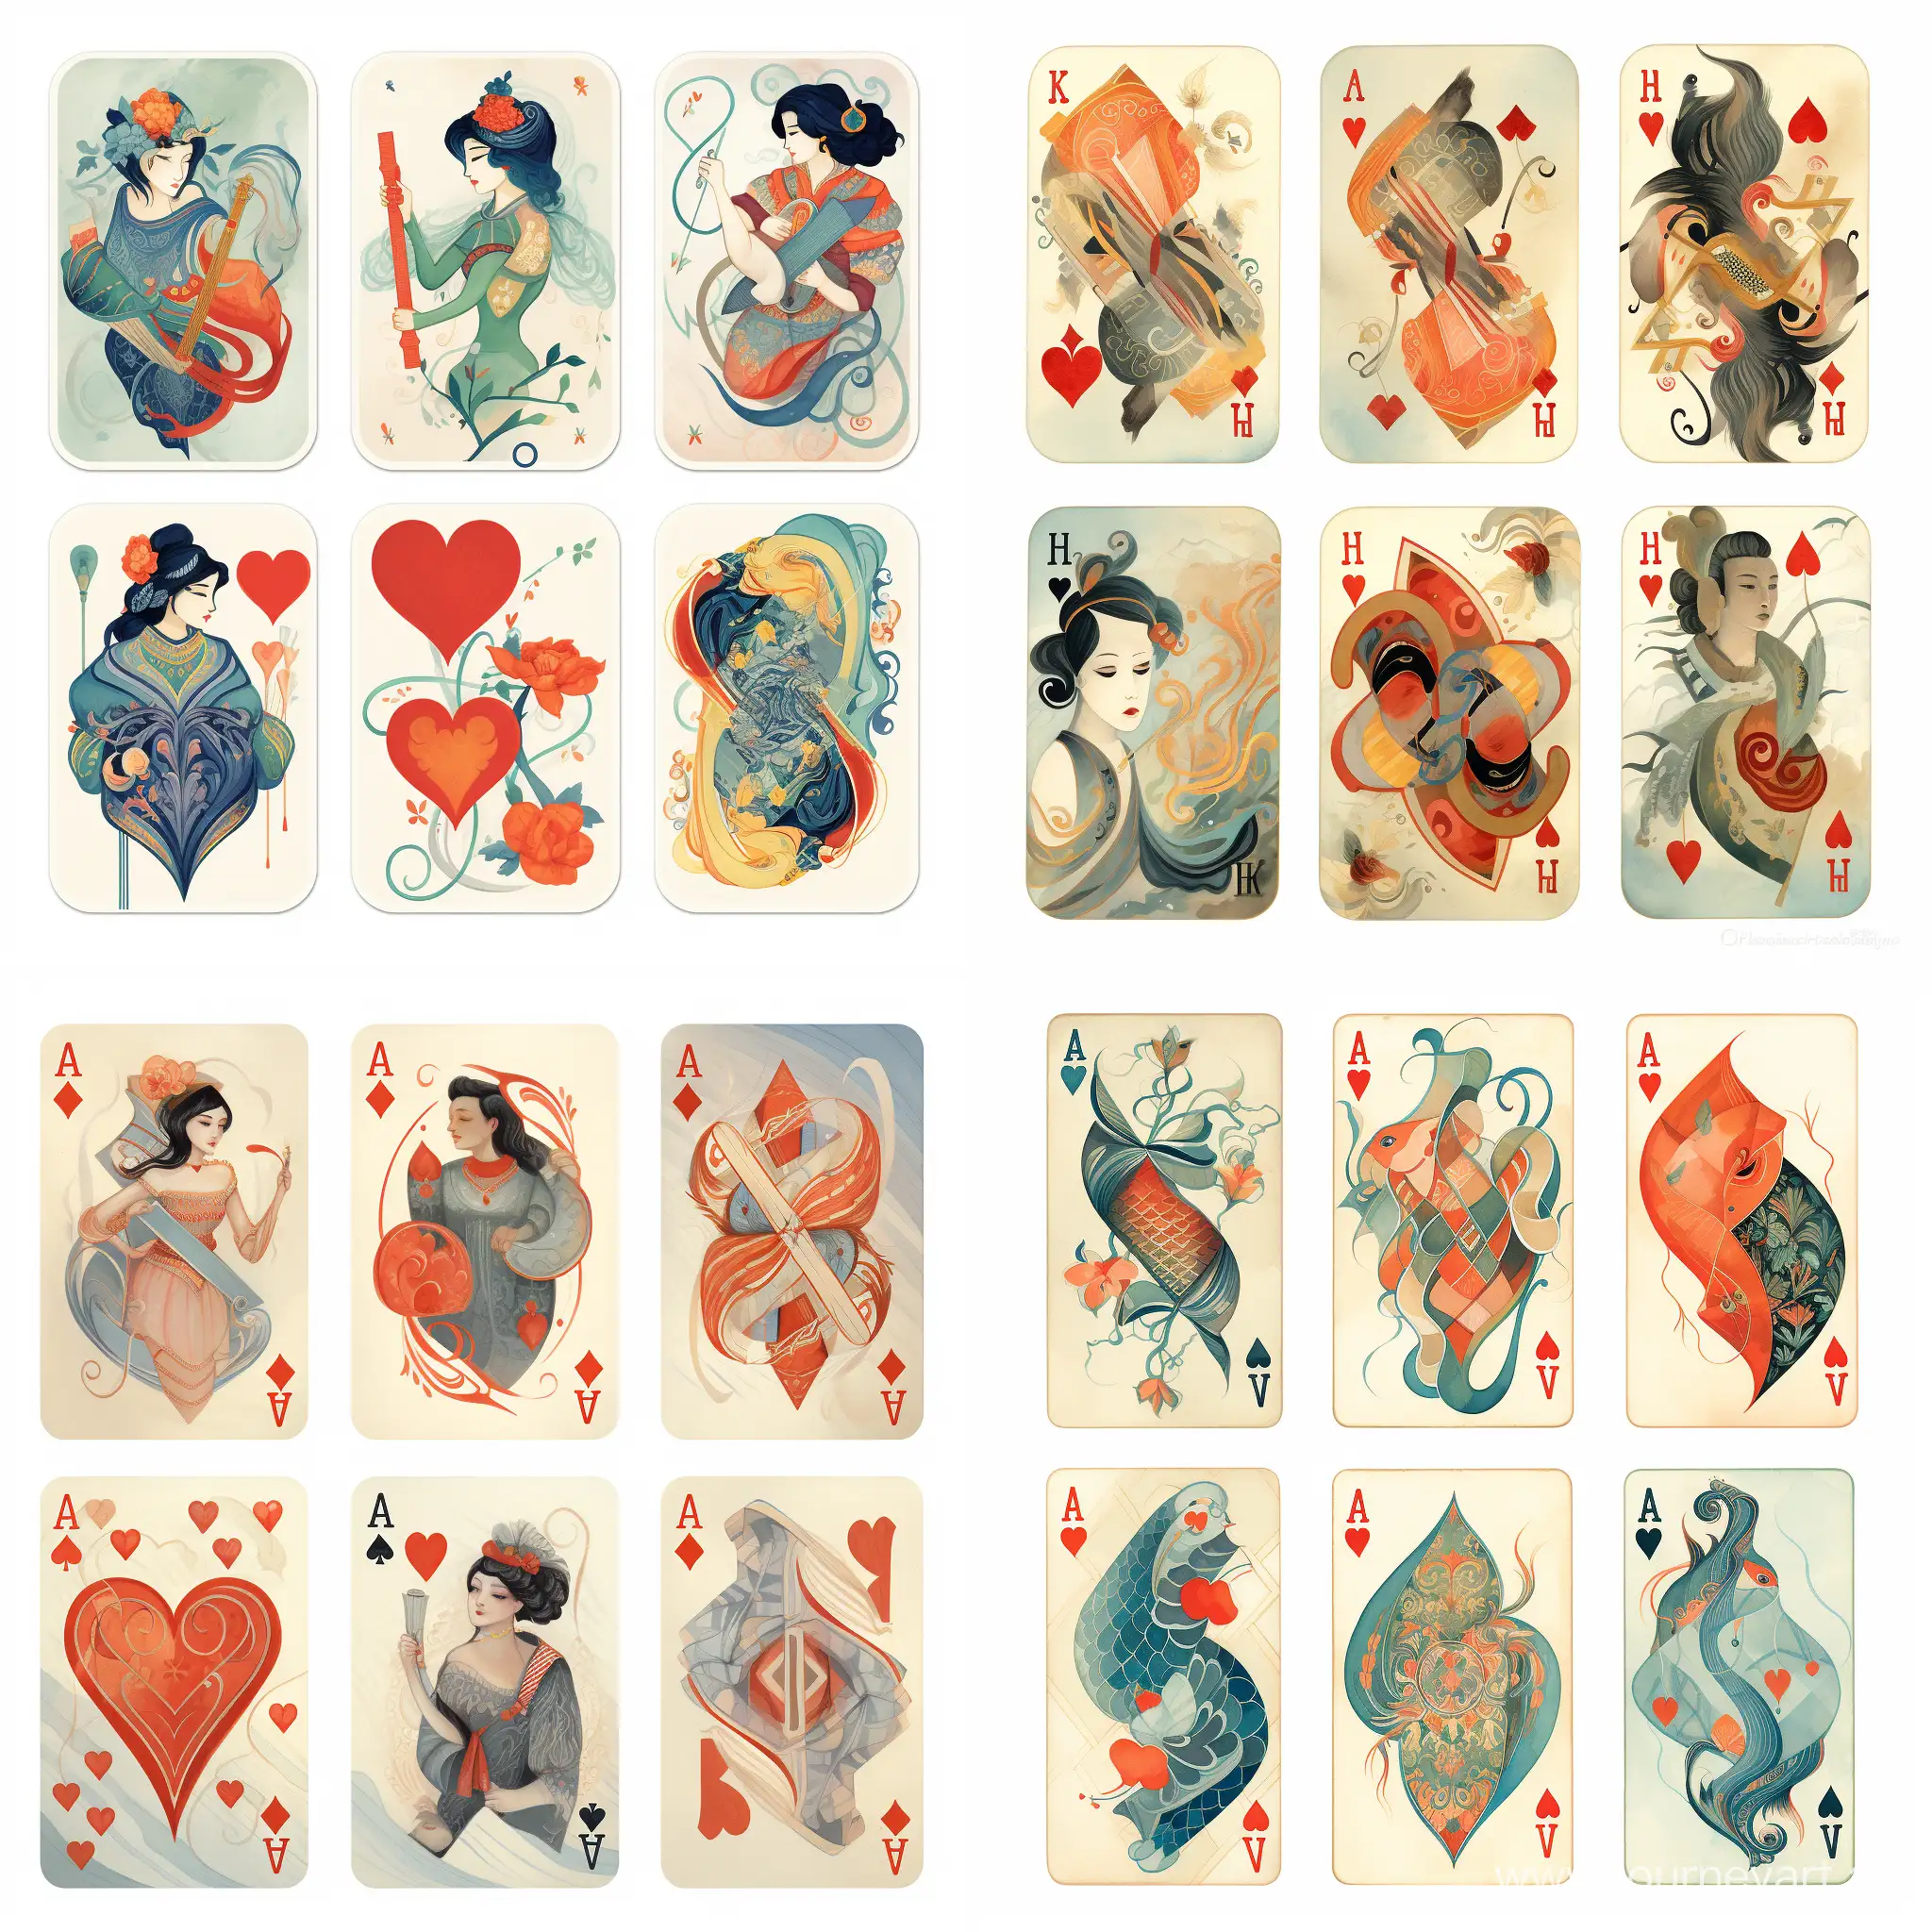 Ancient-China-Playing-Cards-Stylized-Caricature-Illustrations-of-Hearts-Diamonds-Clubs-and-Spades-by-Victo-Ngai